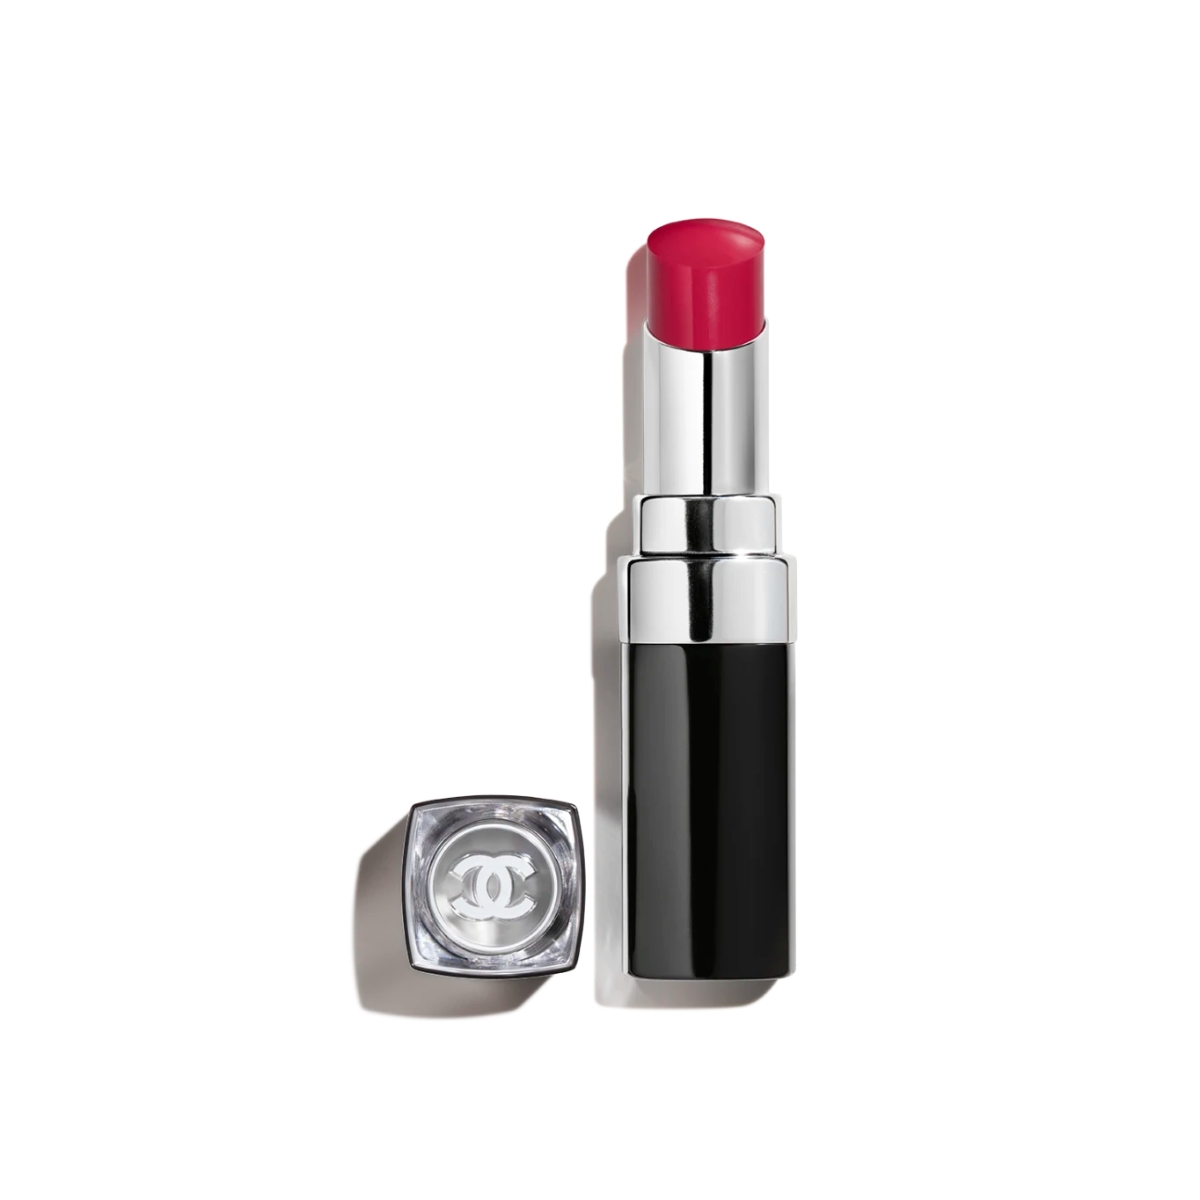 Chanel Rouge Coco Bloom Hydrating and Plumping Lipstick in 126 Season